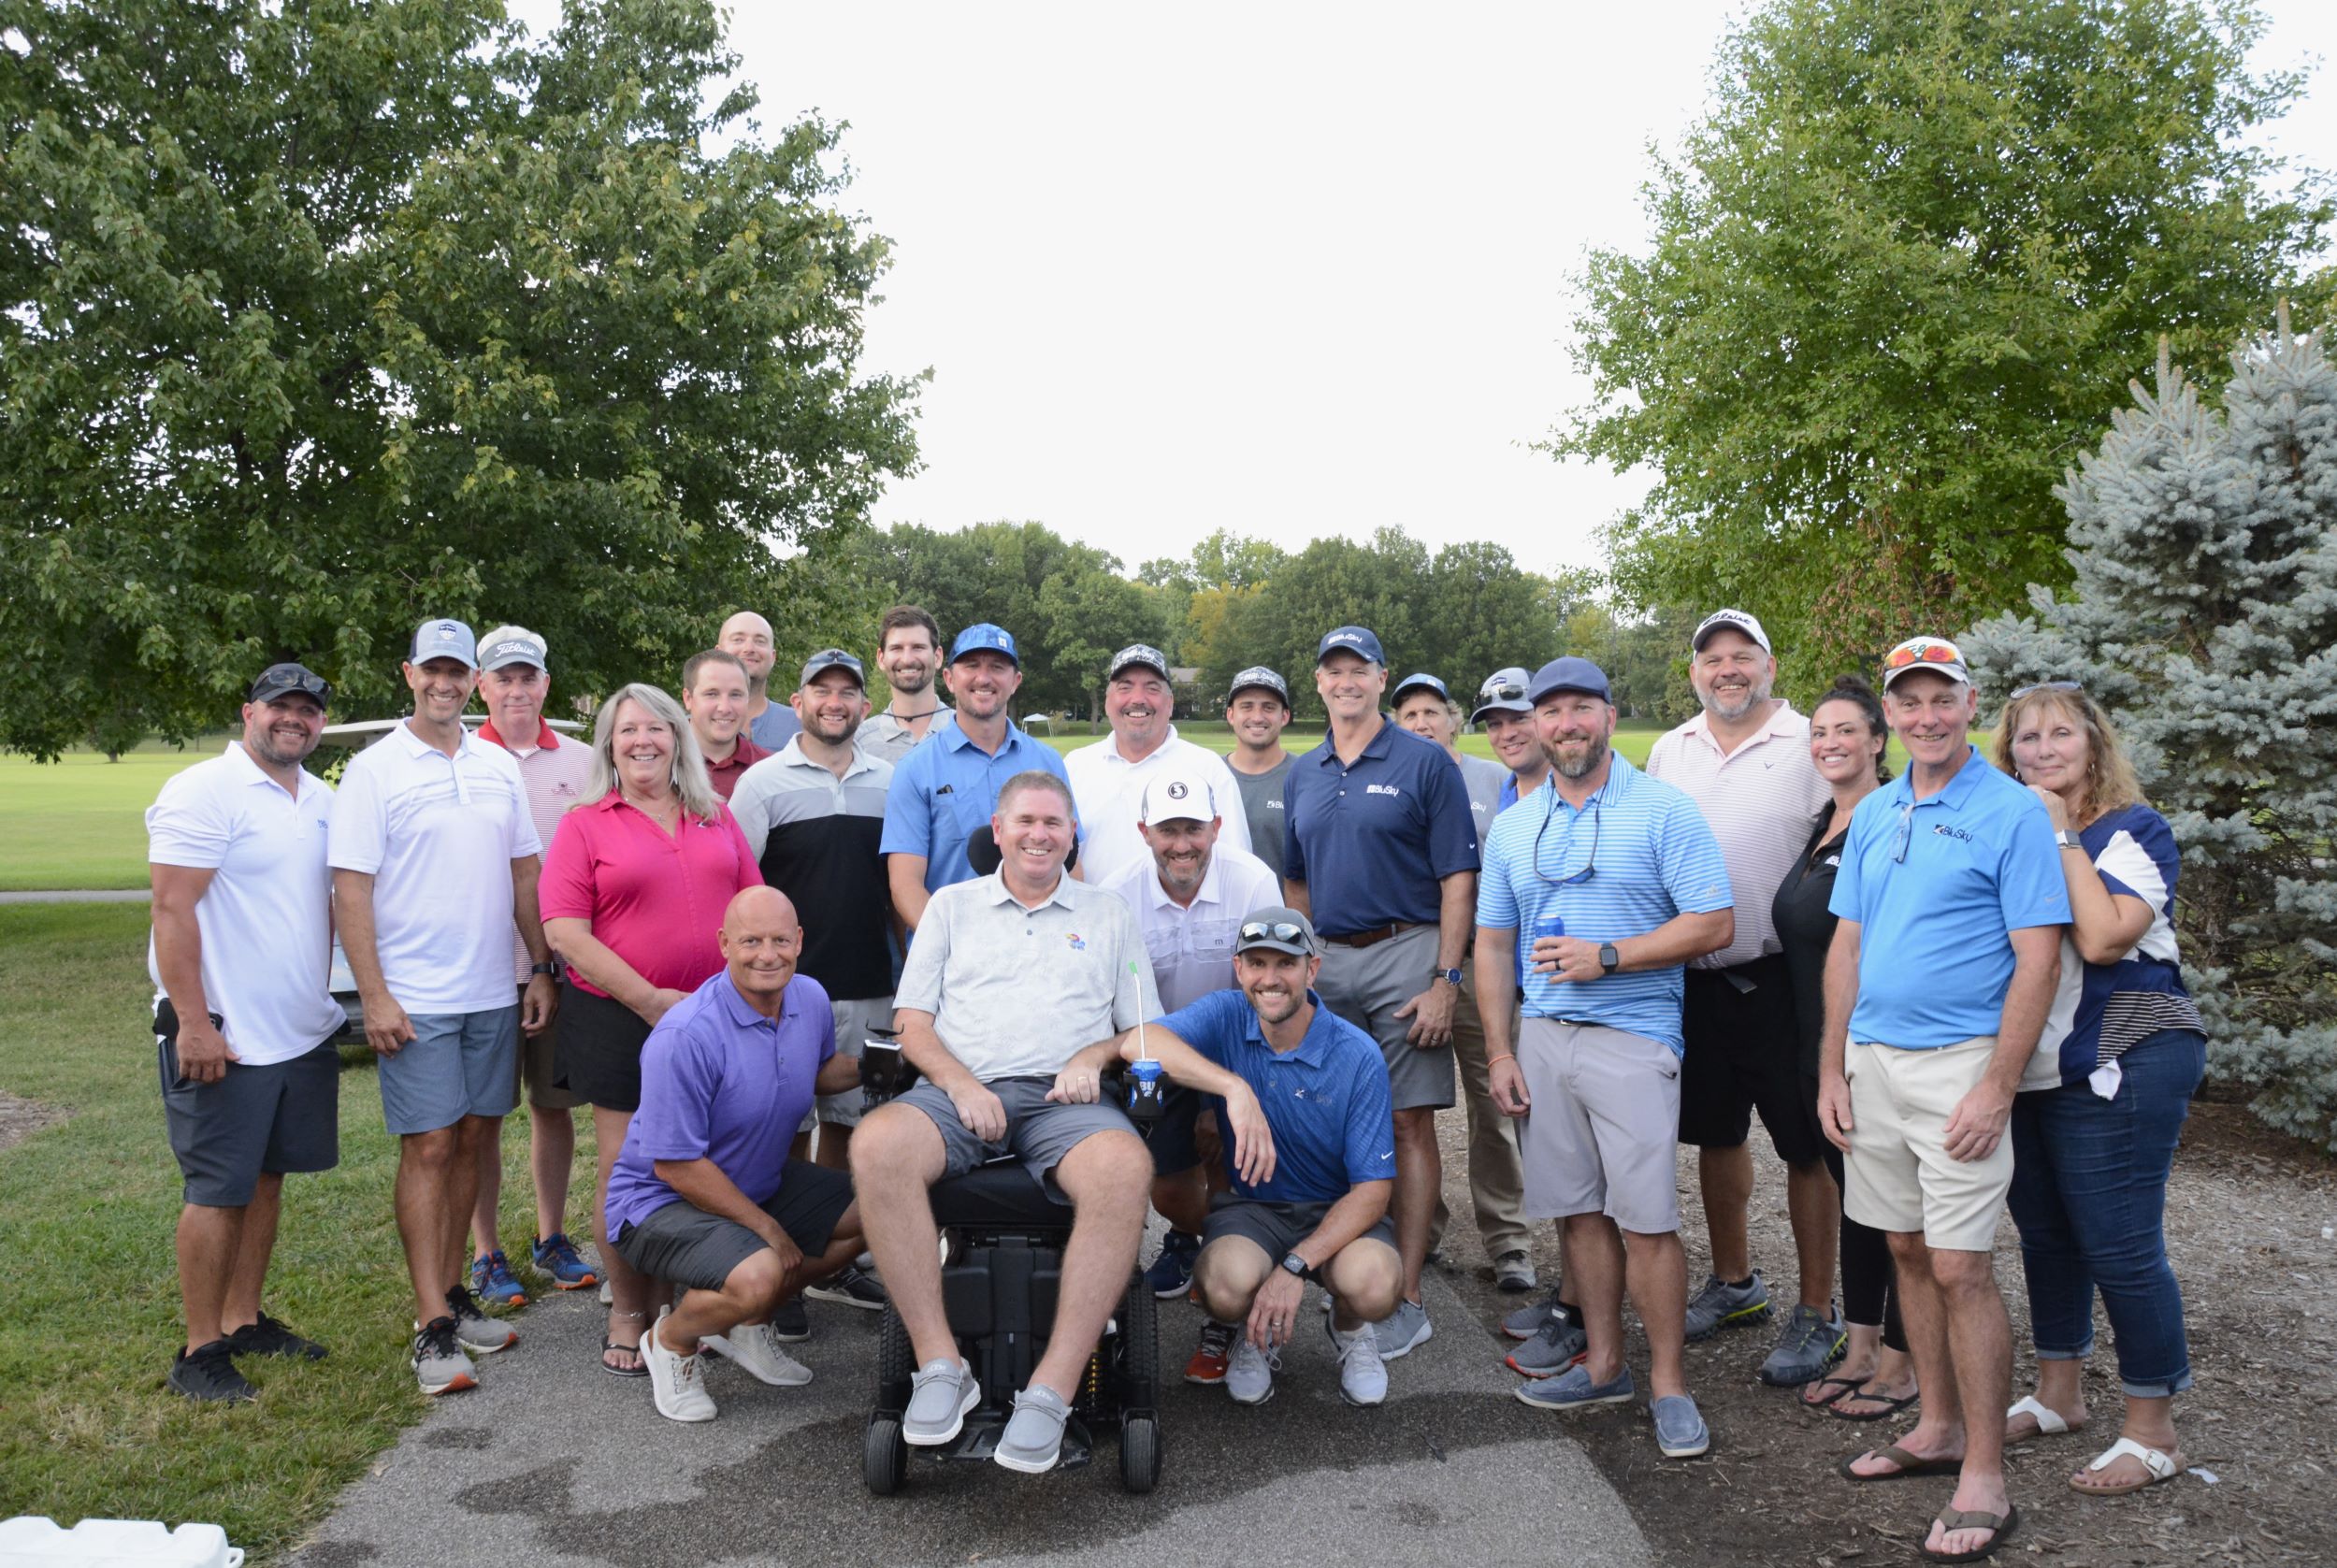 BluSky Philanthropic Event Raises $155,000 For ALS Research in St. Louis